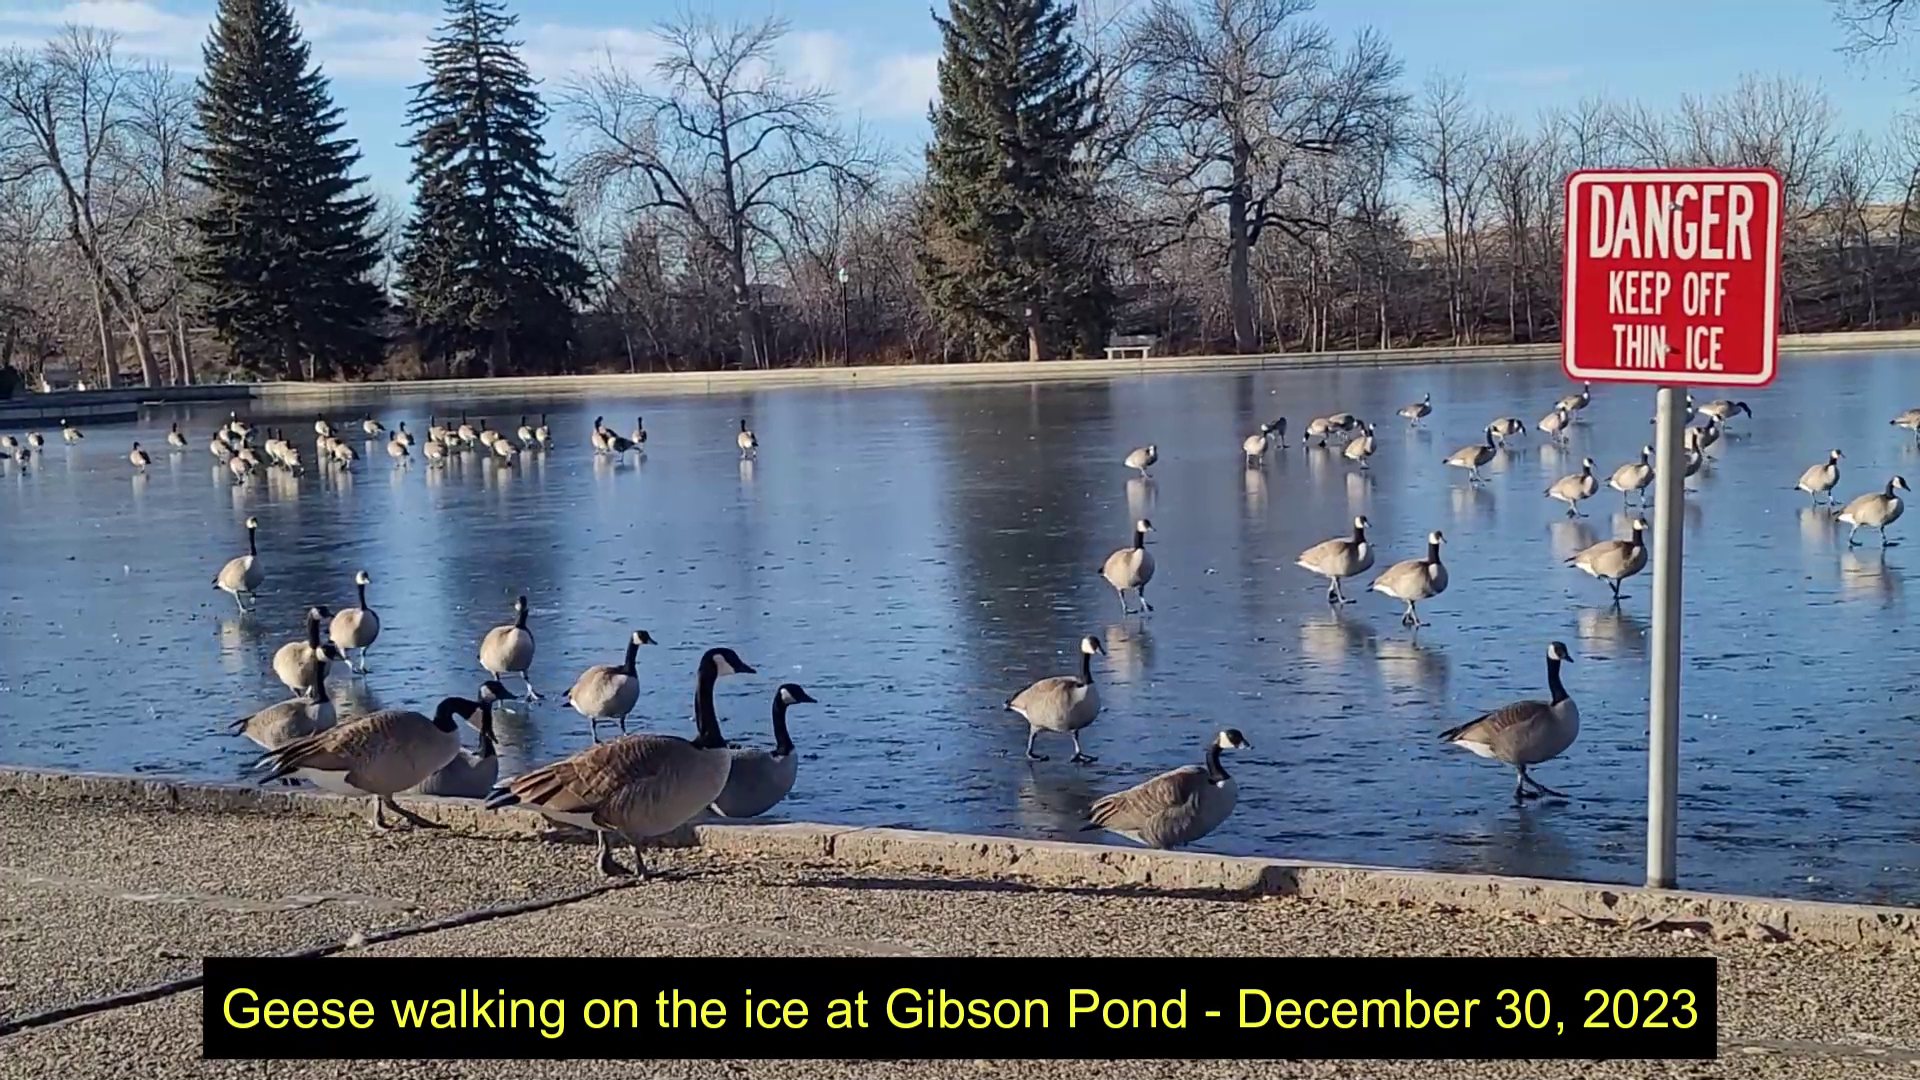 Geese at Gibson Pond